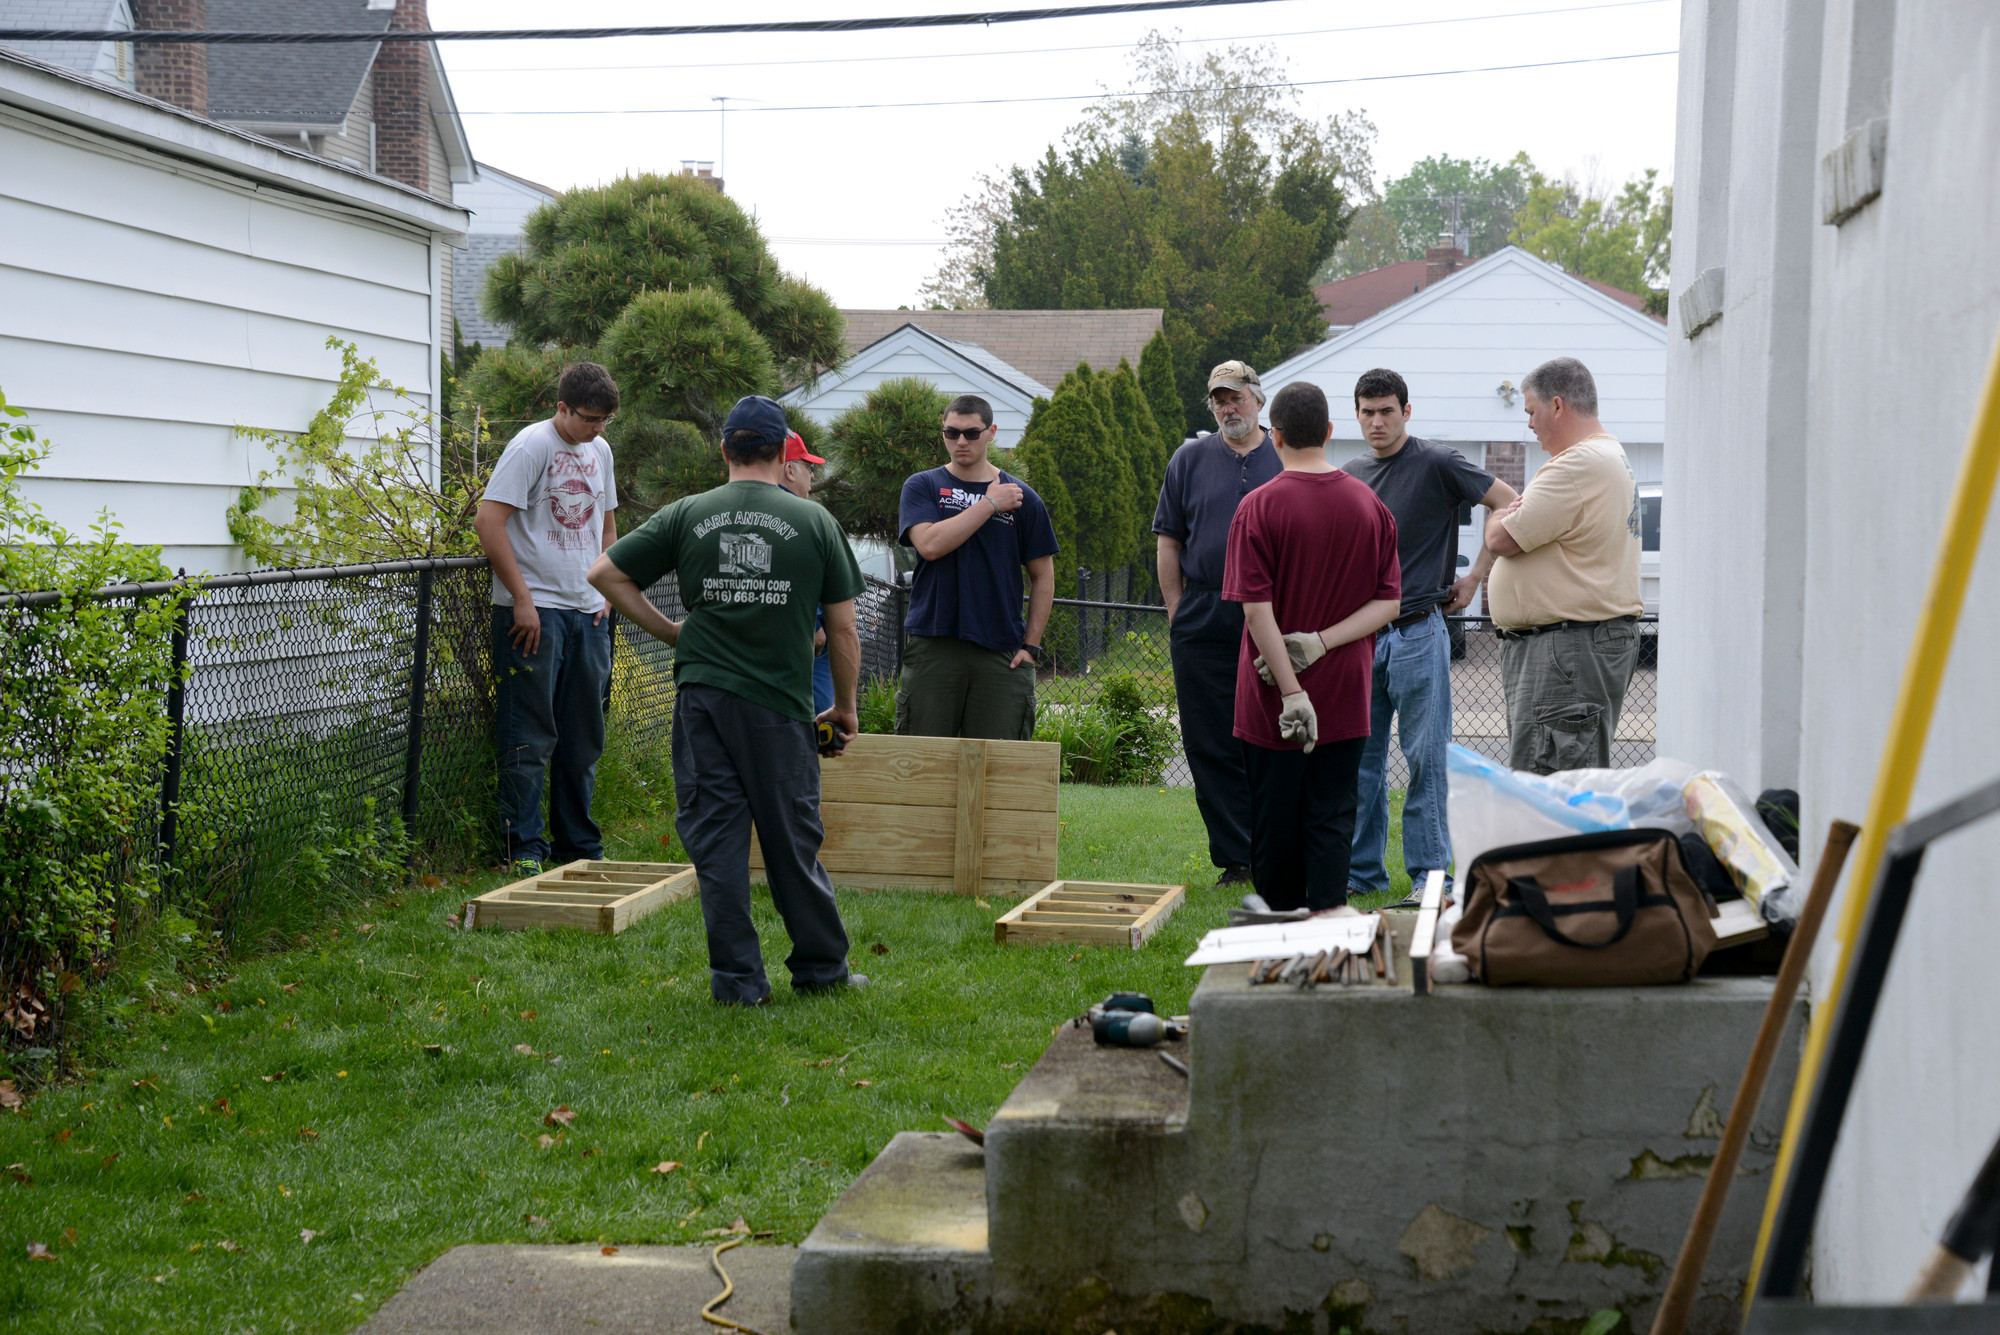 Boy Scouts and leaders from Valley Stream Troop 109 assembled to build a horseshoe court at the Malverne American Legion hall on May 10.